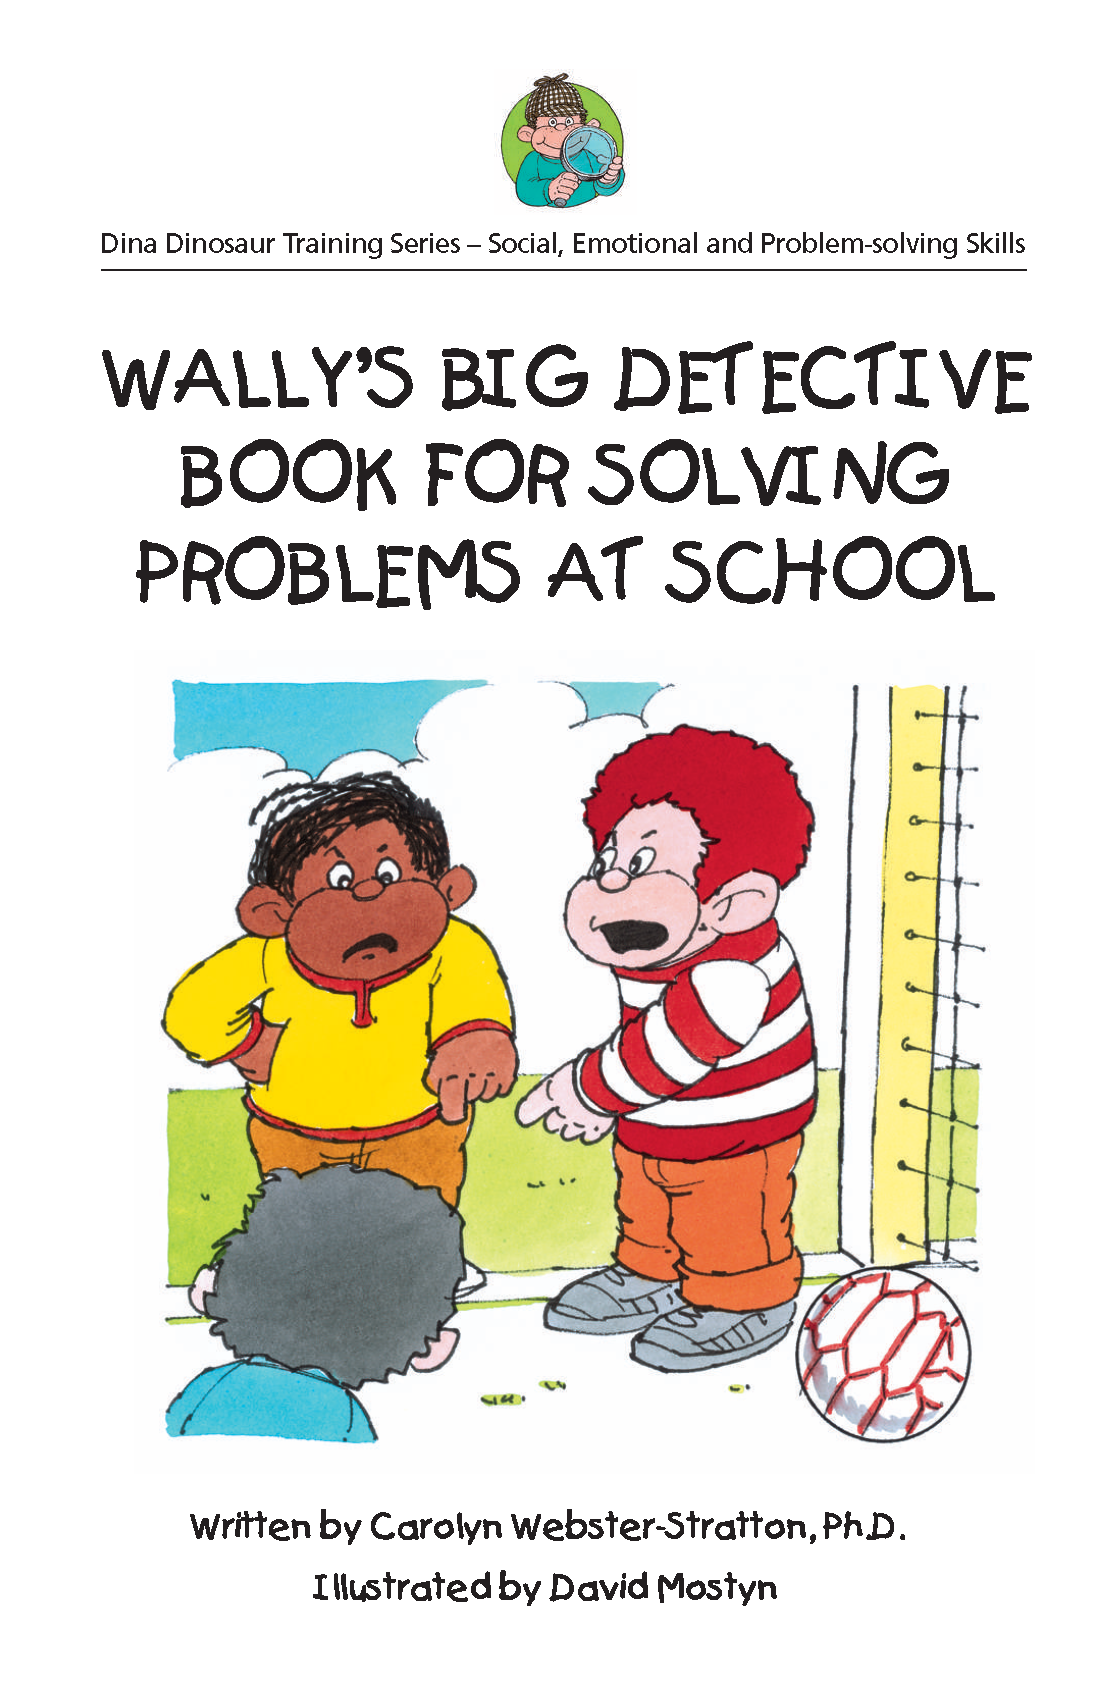 
              Wally’s BIG Book for Solving Problems at School